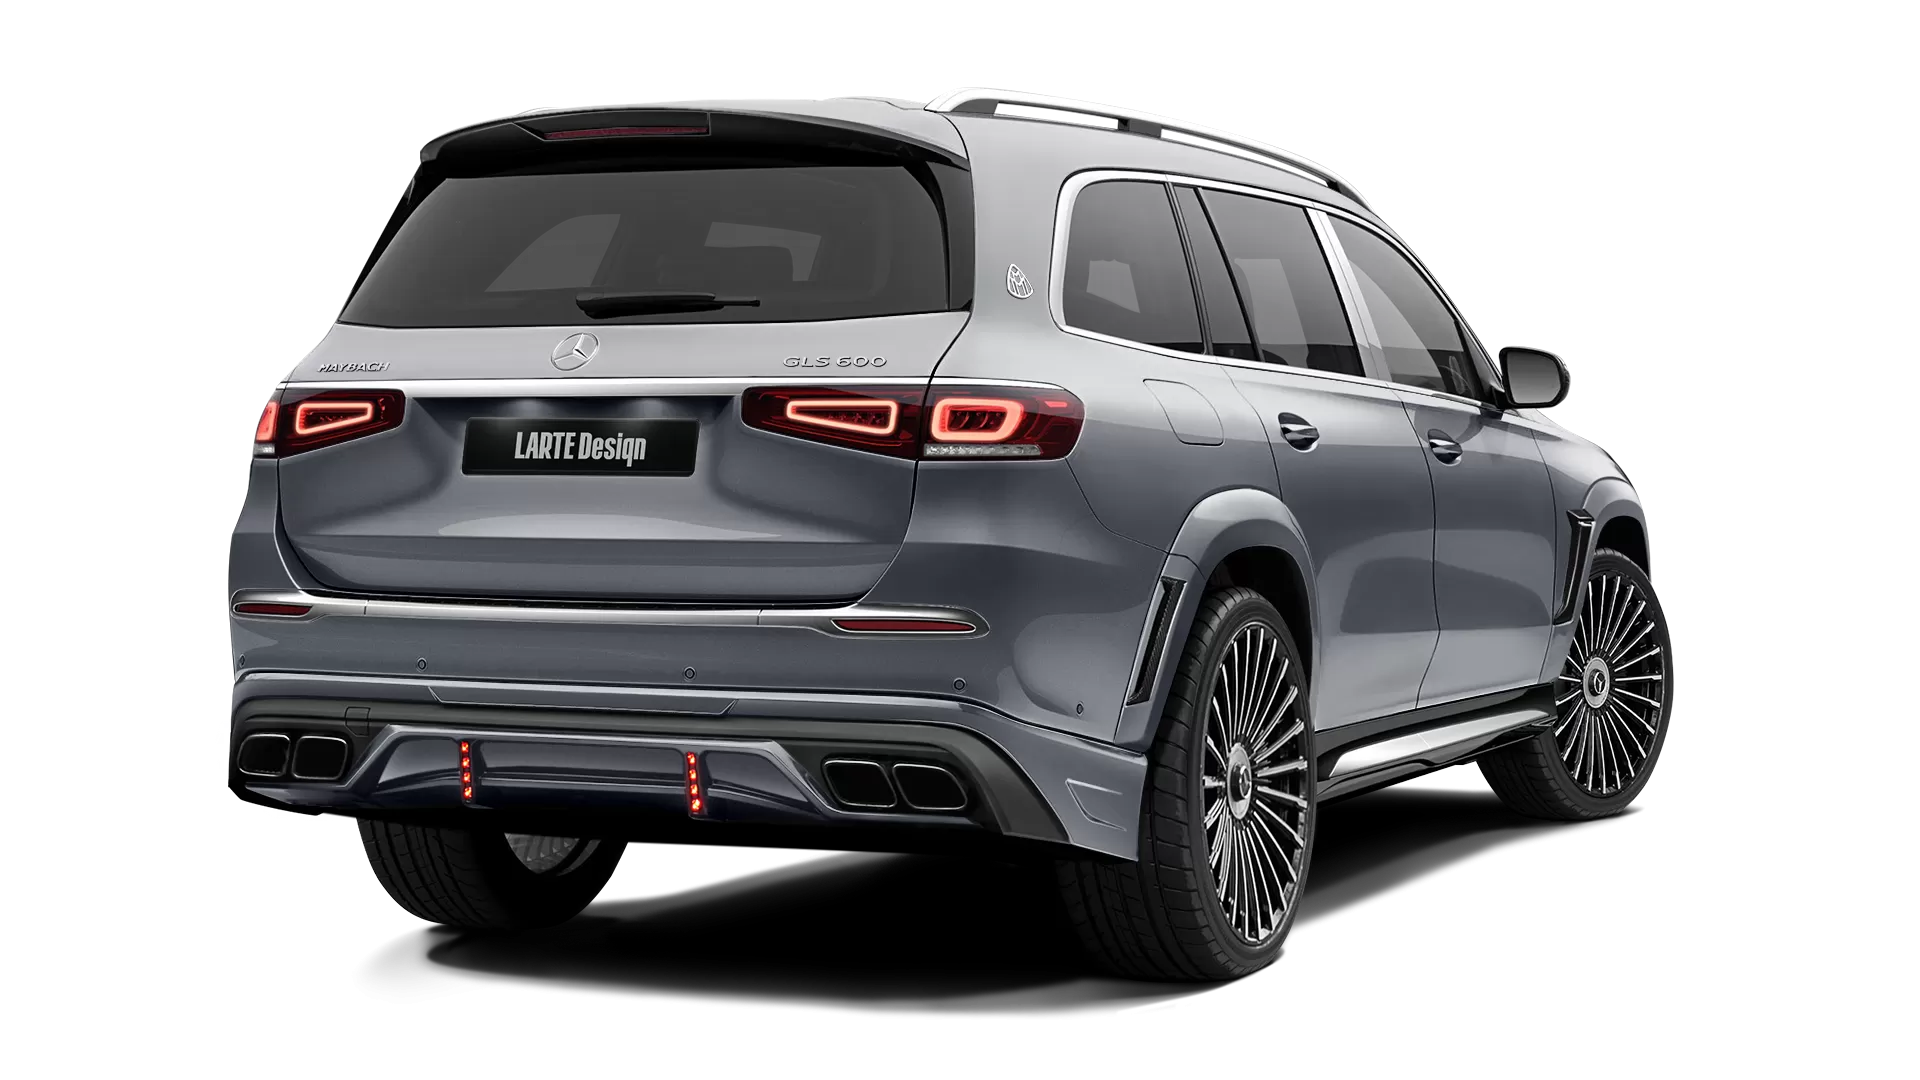 Mercedes Maybach GLS 600 with painted body kit: rear view shown in Selenite Grey